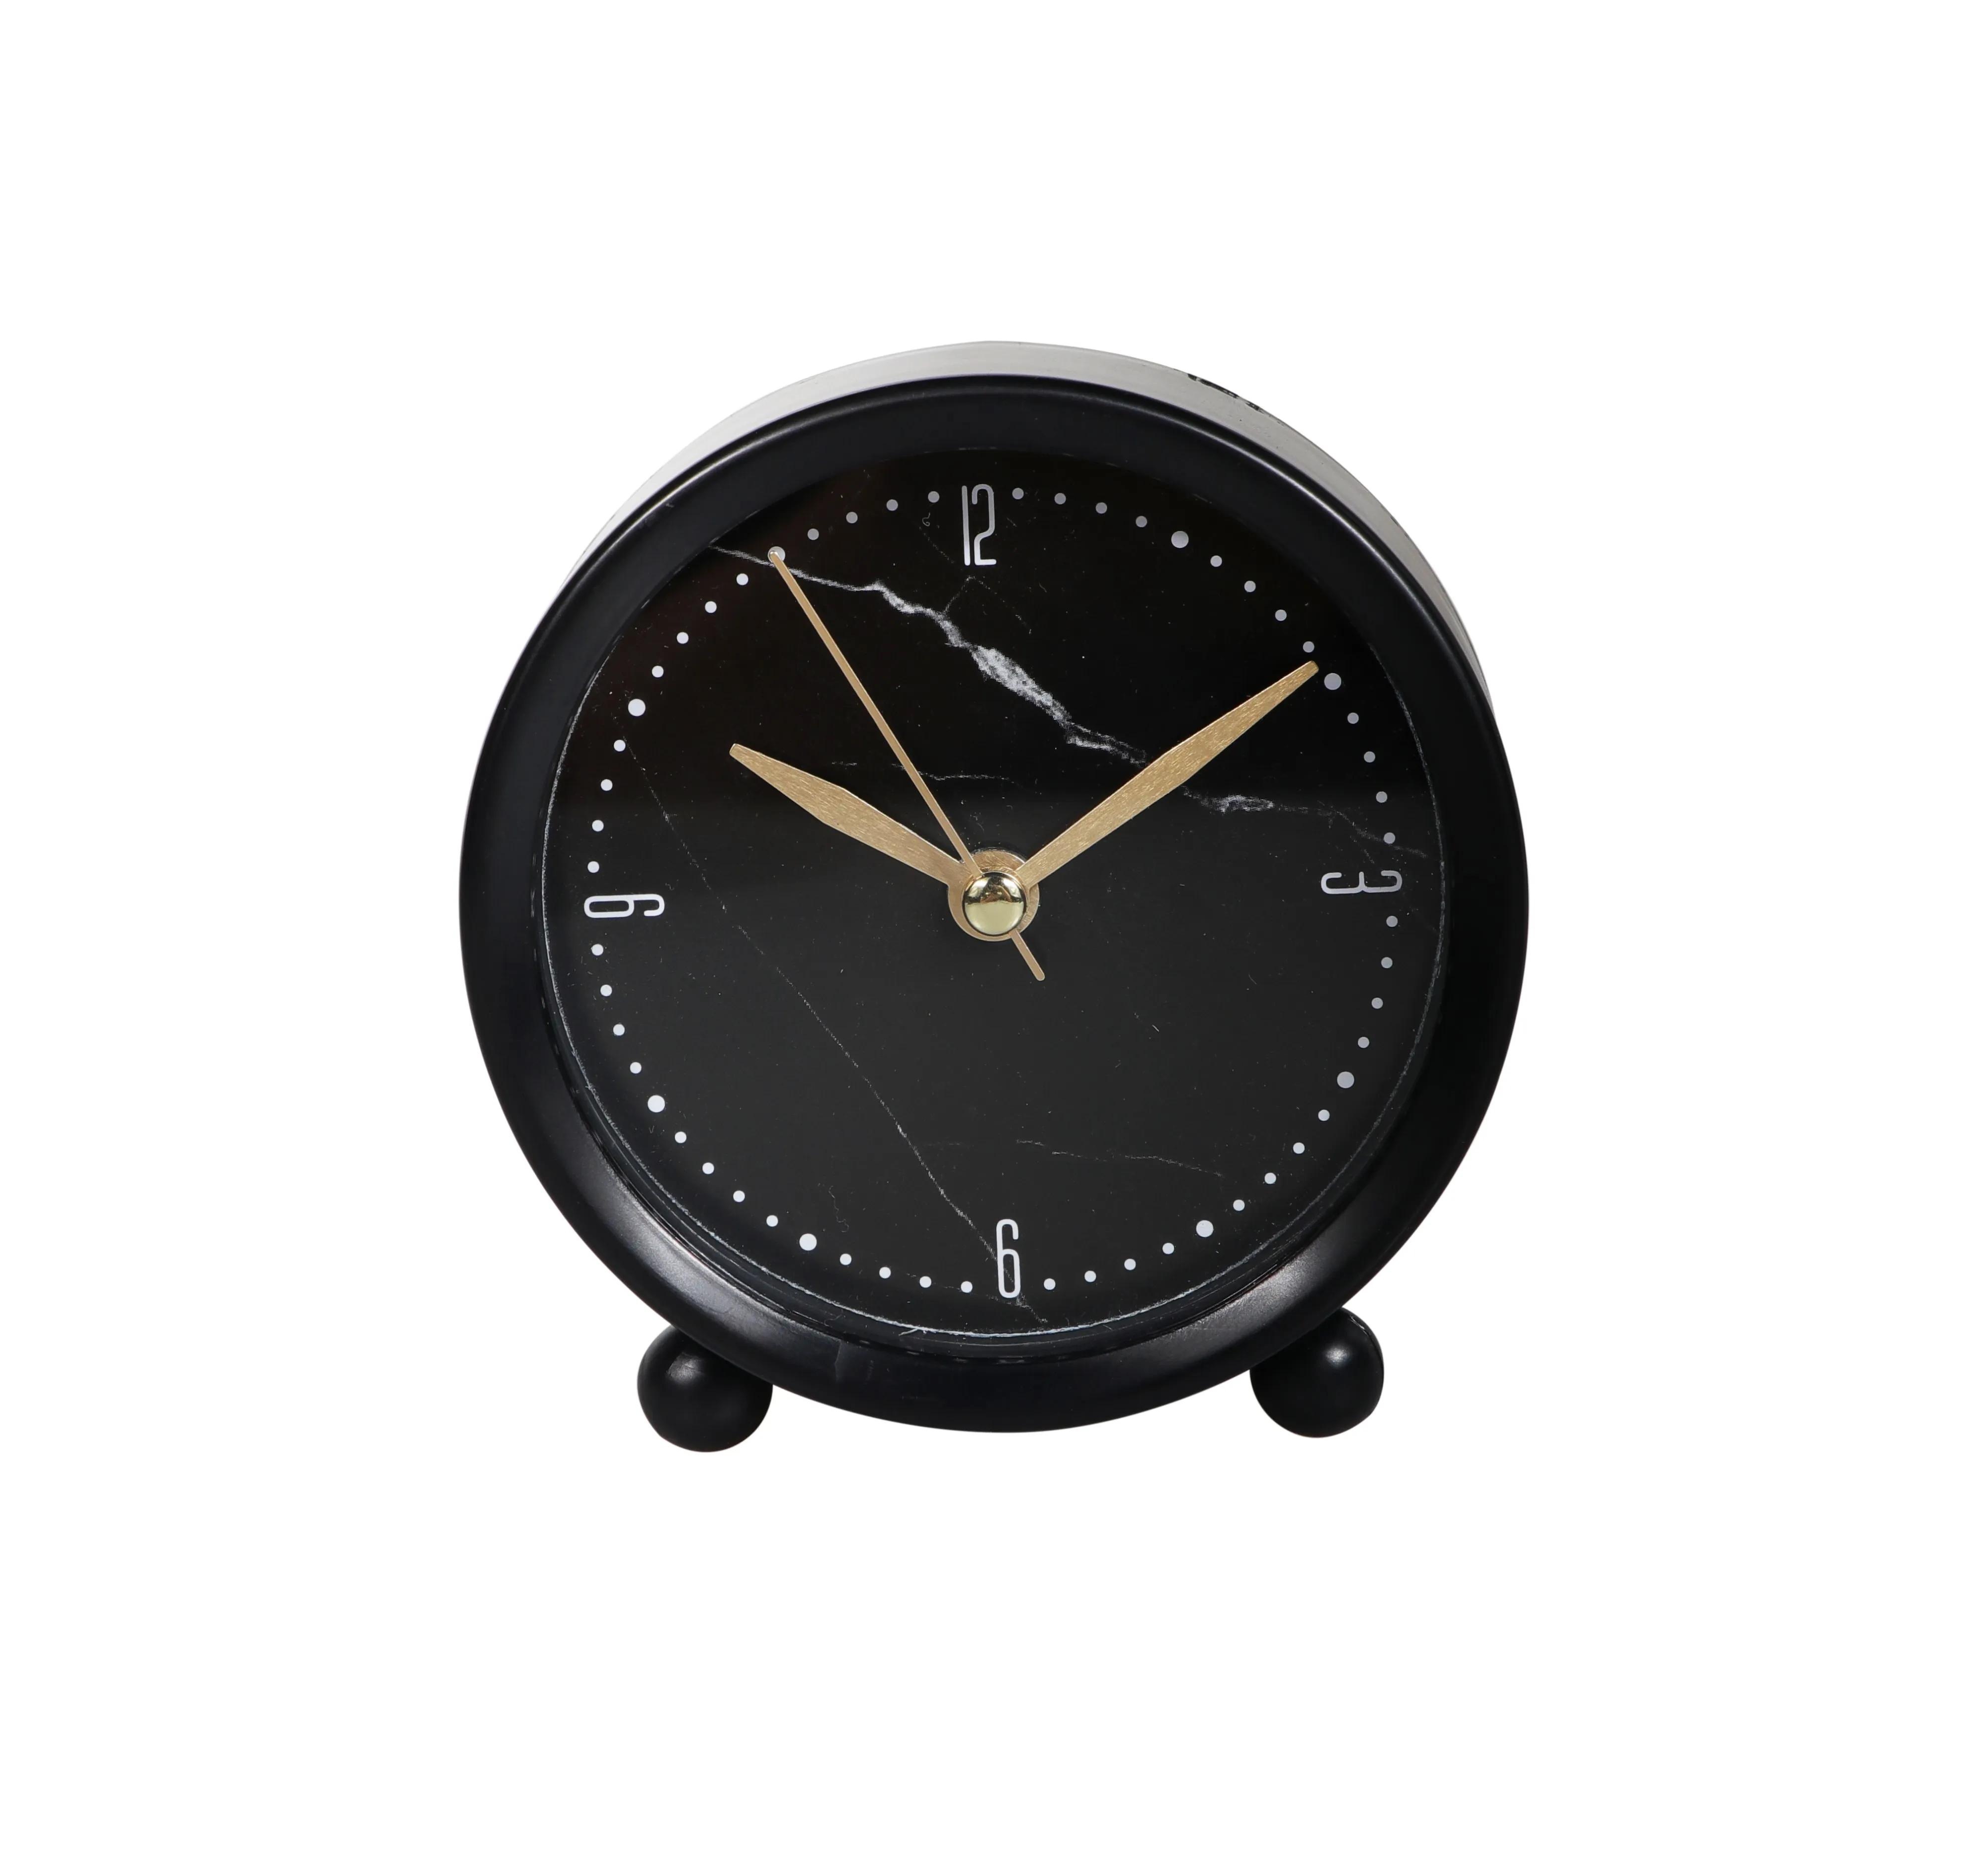 Royalford  RF9285 Table Alarm Clock - Small Battery Operated, Analog Alarm Clock, Silent Non-Ticking, Ascending Beep Sounds, Snooze, Light Functions Ideal to Study Room, Bed Room & More